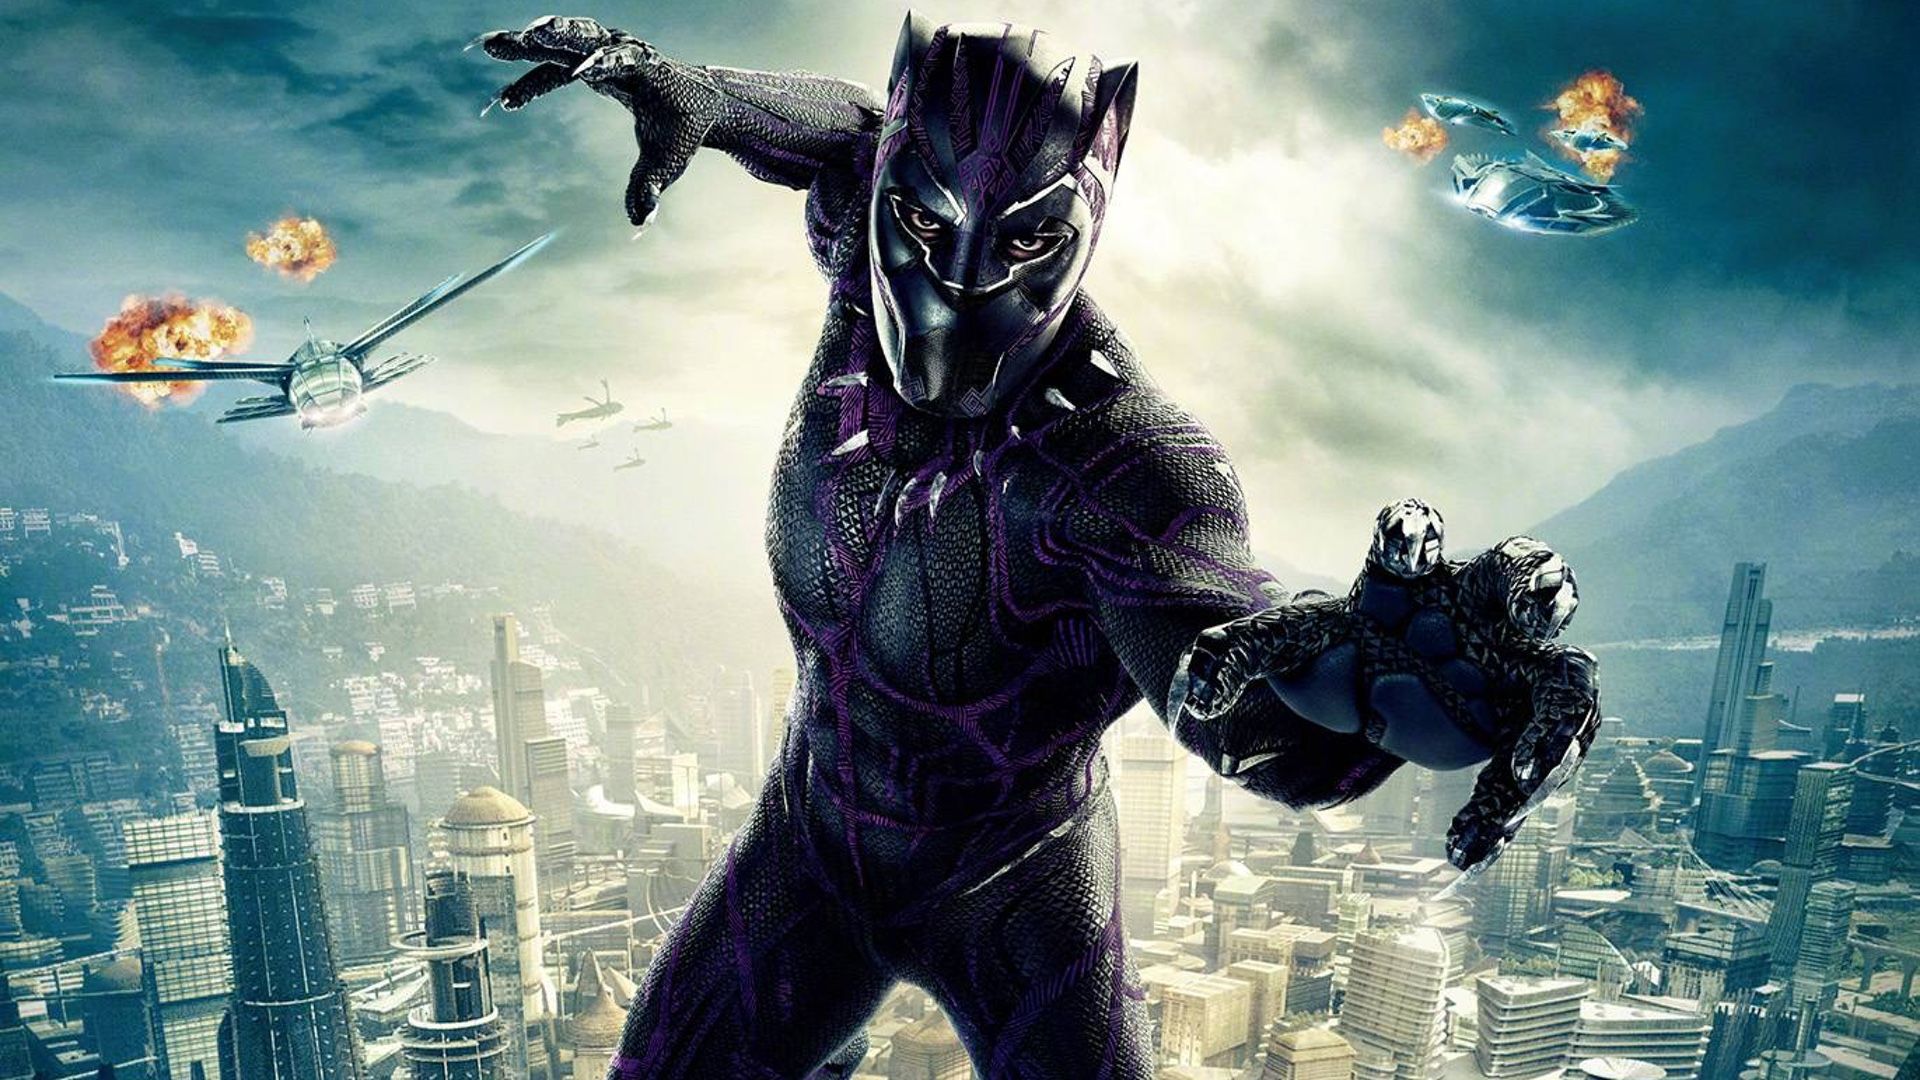 Black Panther 2 Wallpapers - Wallpaper Cave